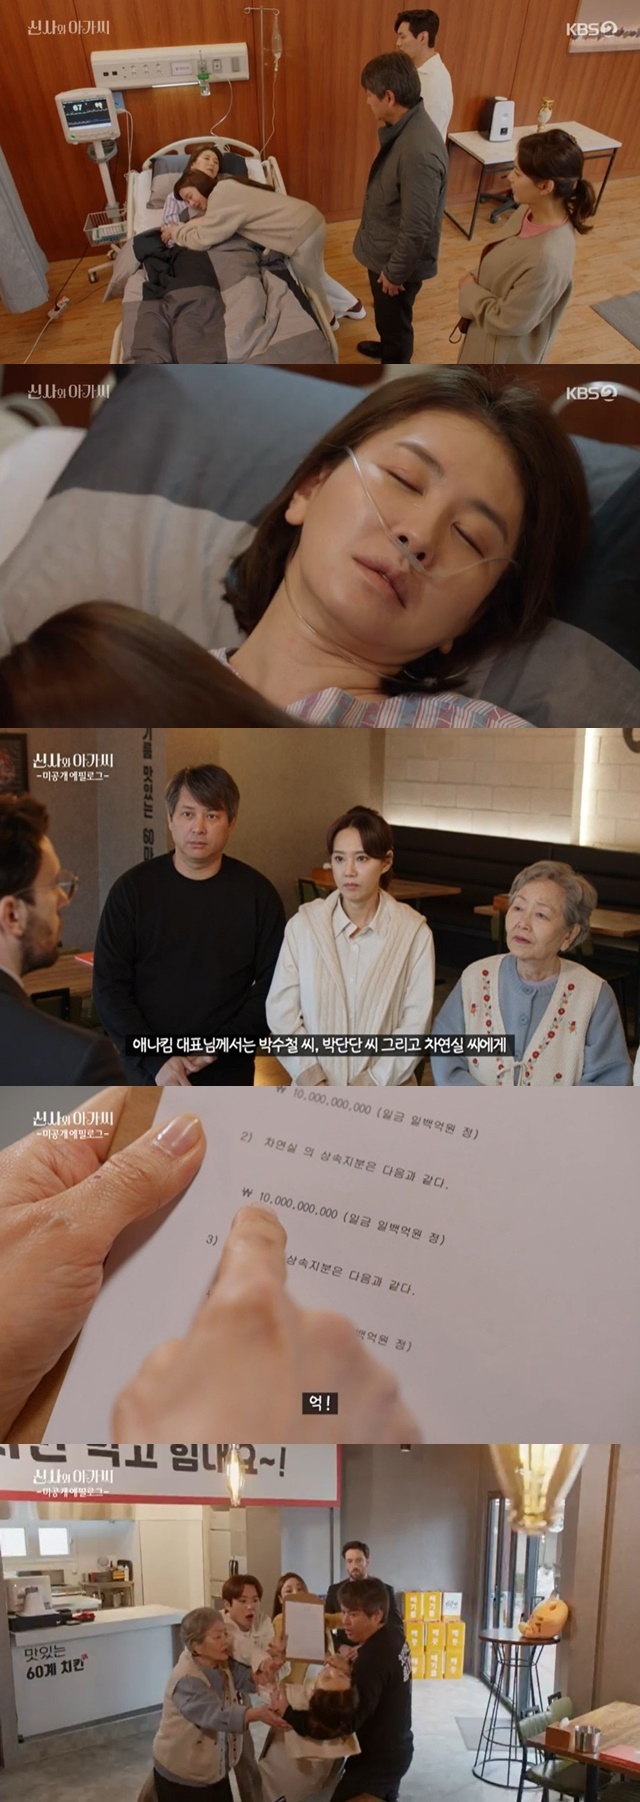 Lee Il-hwa died and left his legacy to Oh Hyun-kyung, who raised his daughter Lee Se-hee.In the 52nd episode of KBS 2TV weekend Drama Shinto and Lady (the last episode/playplayplay by Kim Sa-kyung/directed by Shin Chang-seok), which aired on March 27, Ana Kim (Lee Il-hwa) died before undergoing pancreatic cancer surgery.On the same day, Anna Kims death was drawn. Thank you, Anna Kim told Lee Young-guk (Ji Hyun-woo).We ask for our Dandan, he said, asking his daughter, Park Dandan (Lee Se-hee), and said, Thank you, to Cha Yeon-sil (Oh Hyun-kyung), who raised Park Dandan.Ill be there when Dandan gets married and has a baby.Anna Kim asked Park Soo-chul (Lee Jong-won) to allow her daughters, Park Dan-dan and Lee Young-guk, to love her, saying, I am so sorry and thank you, and listen to what I asked you to do, okay? Its my last request.After Anna Kim died, Park Soo-chul allowed her daughter Park Dan-dan to marry Lee Young-guk. At the end of the broadcast, Park Dan-dan and Lee Young-guks wedding ceremony was held and a happy ending was completed.In the unpublished epilogue video released on the official website after the broadcast, Anna Kims daughter Park Dan-dan and her ex-husband Park Soo-cheol, as well as Park Soo-cheol, who raised Park Dan-dan, were also portrayed.